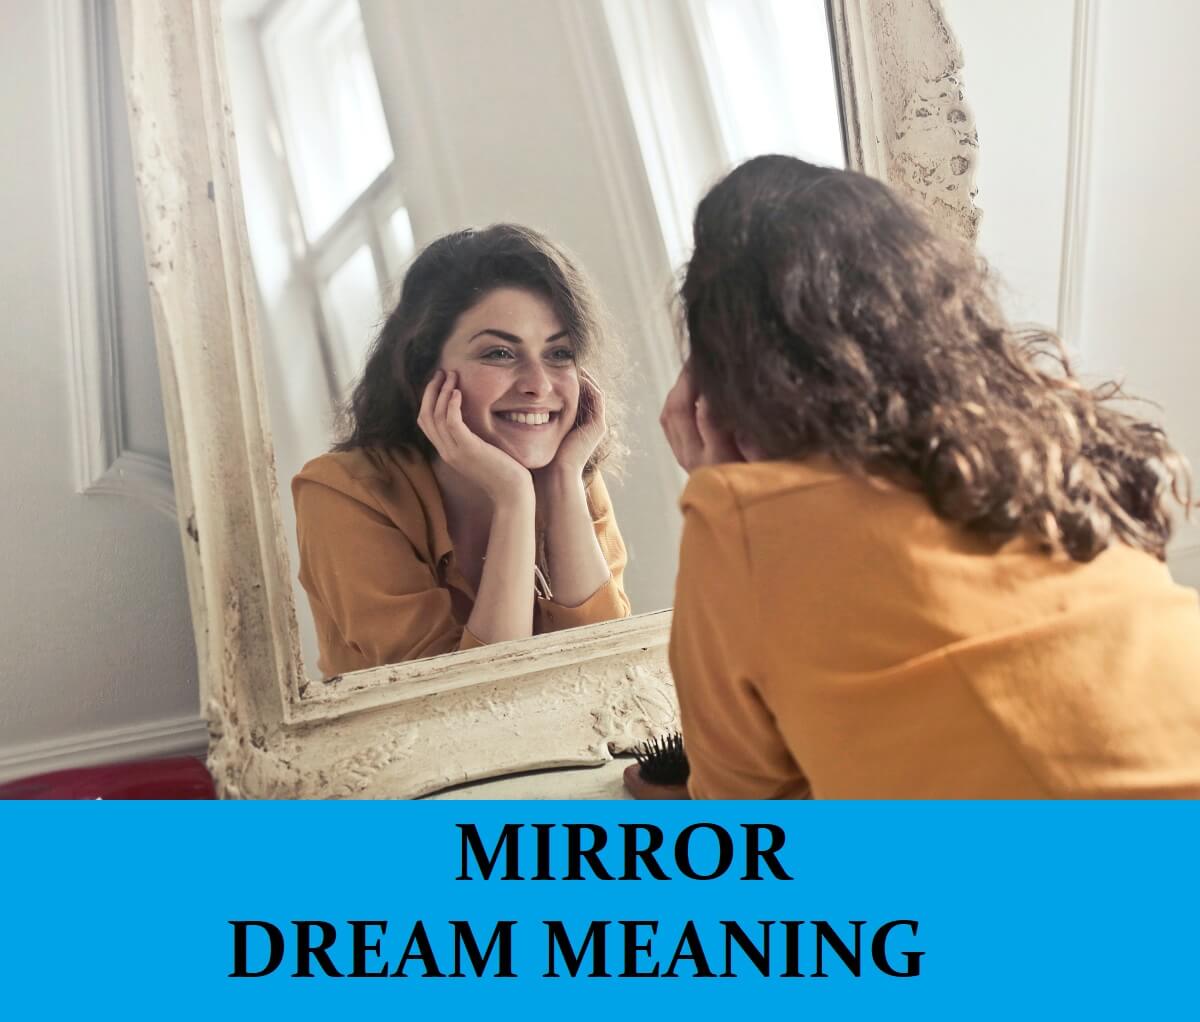 Mirror Dream Meaning Top 17 Dreams, What Is The Meaning Of A Broken Mirror In Dream